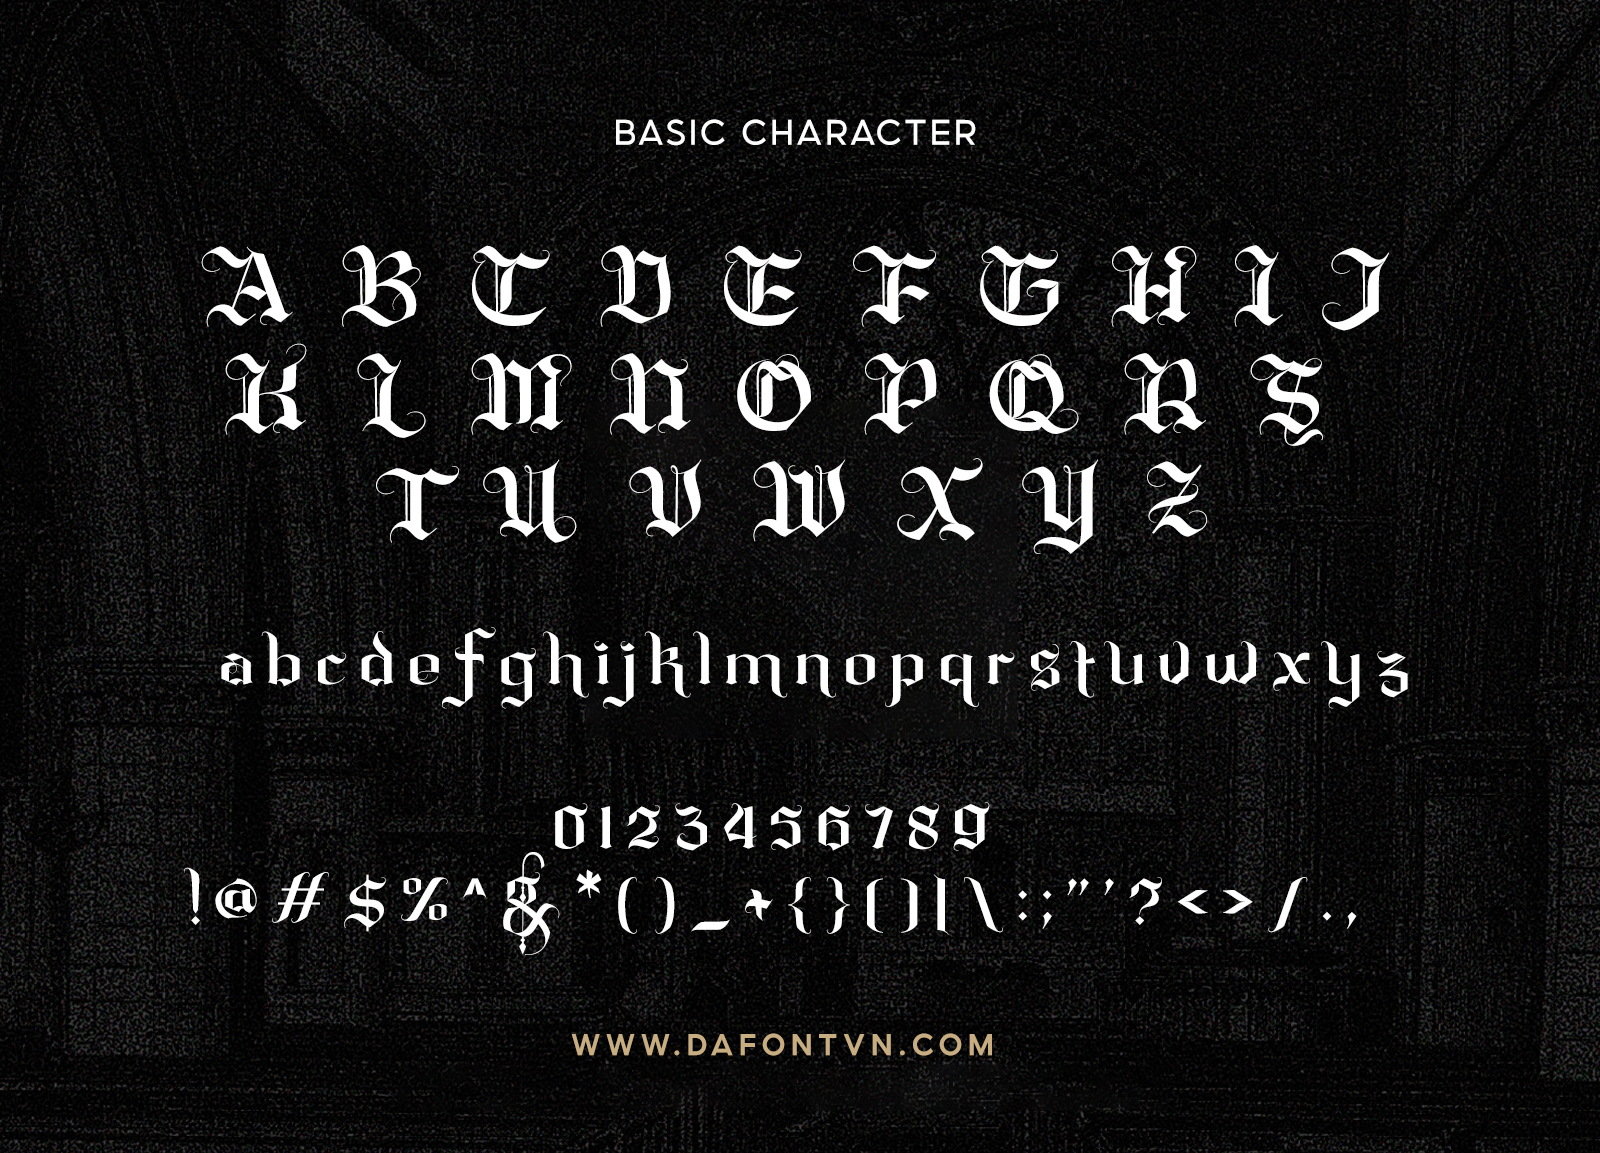 Font Ghelisyah - All Character